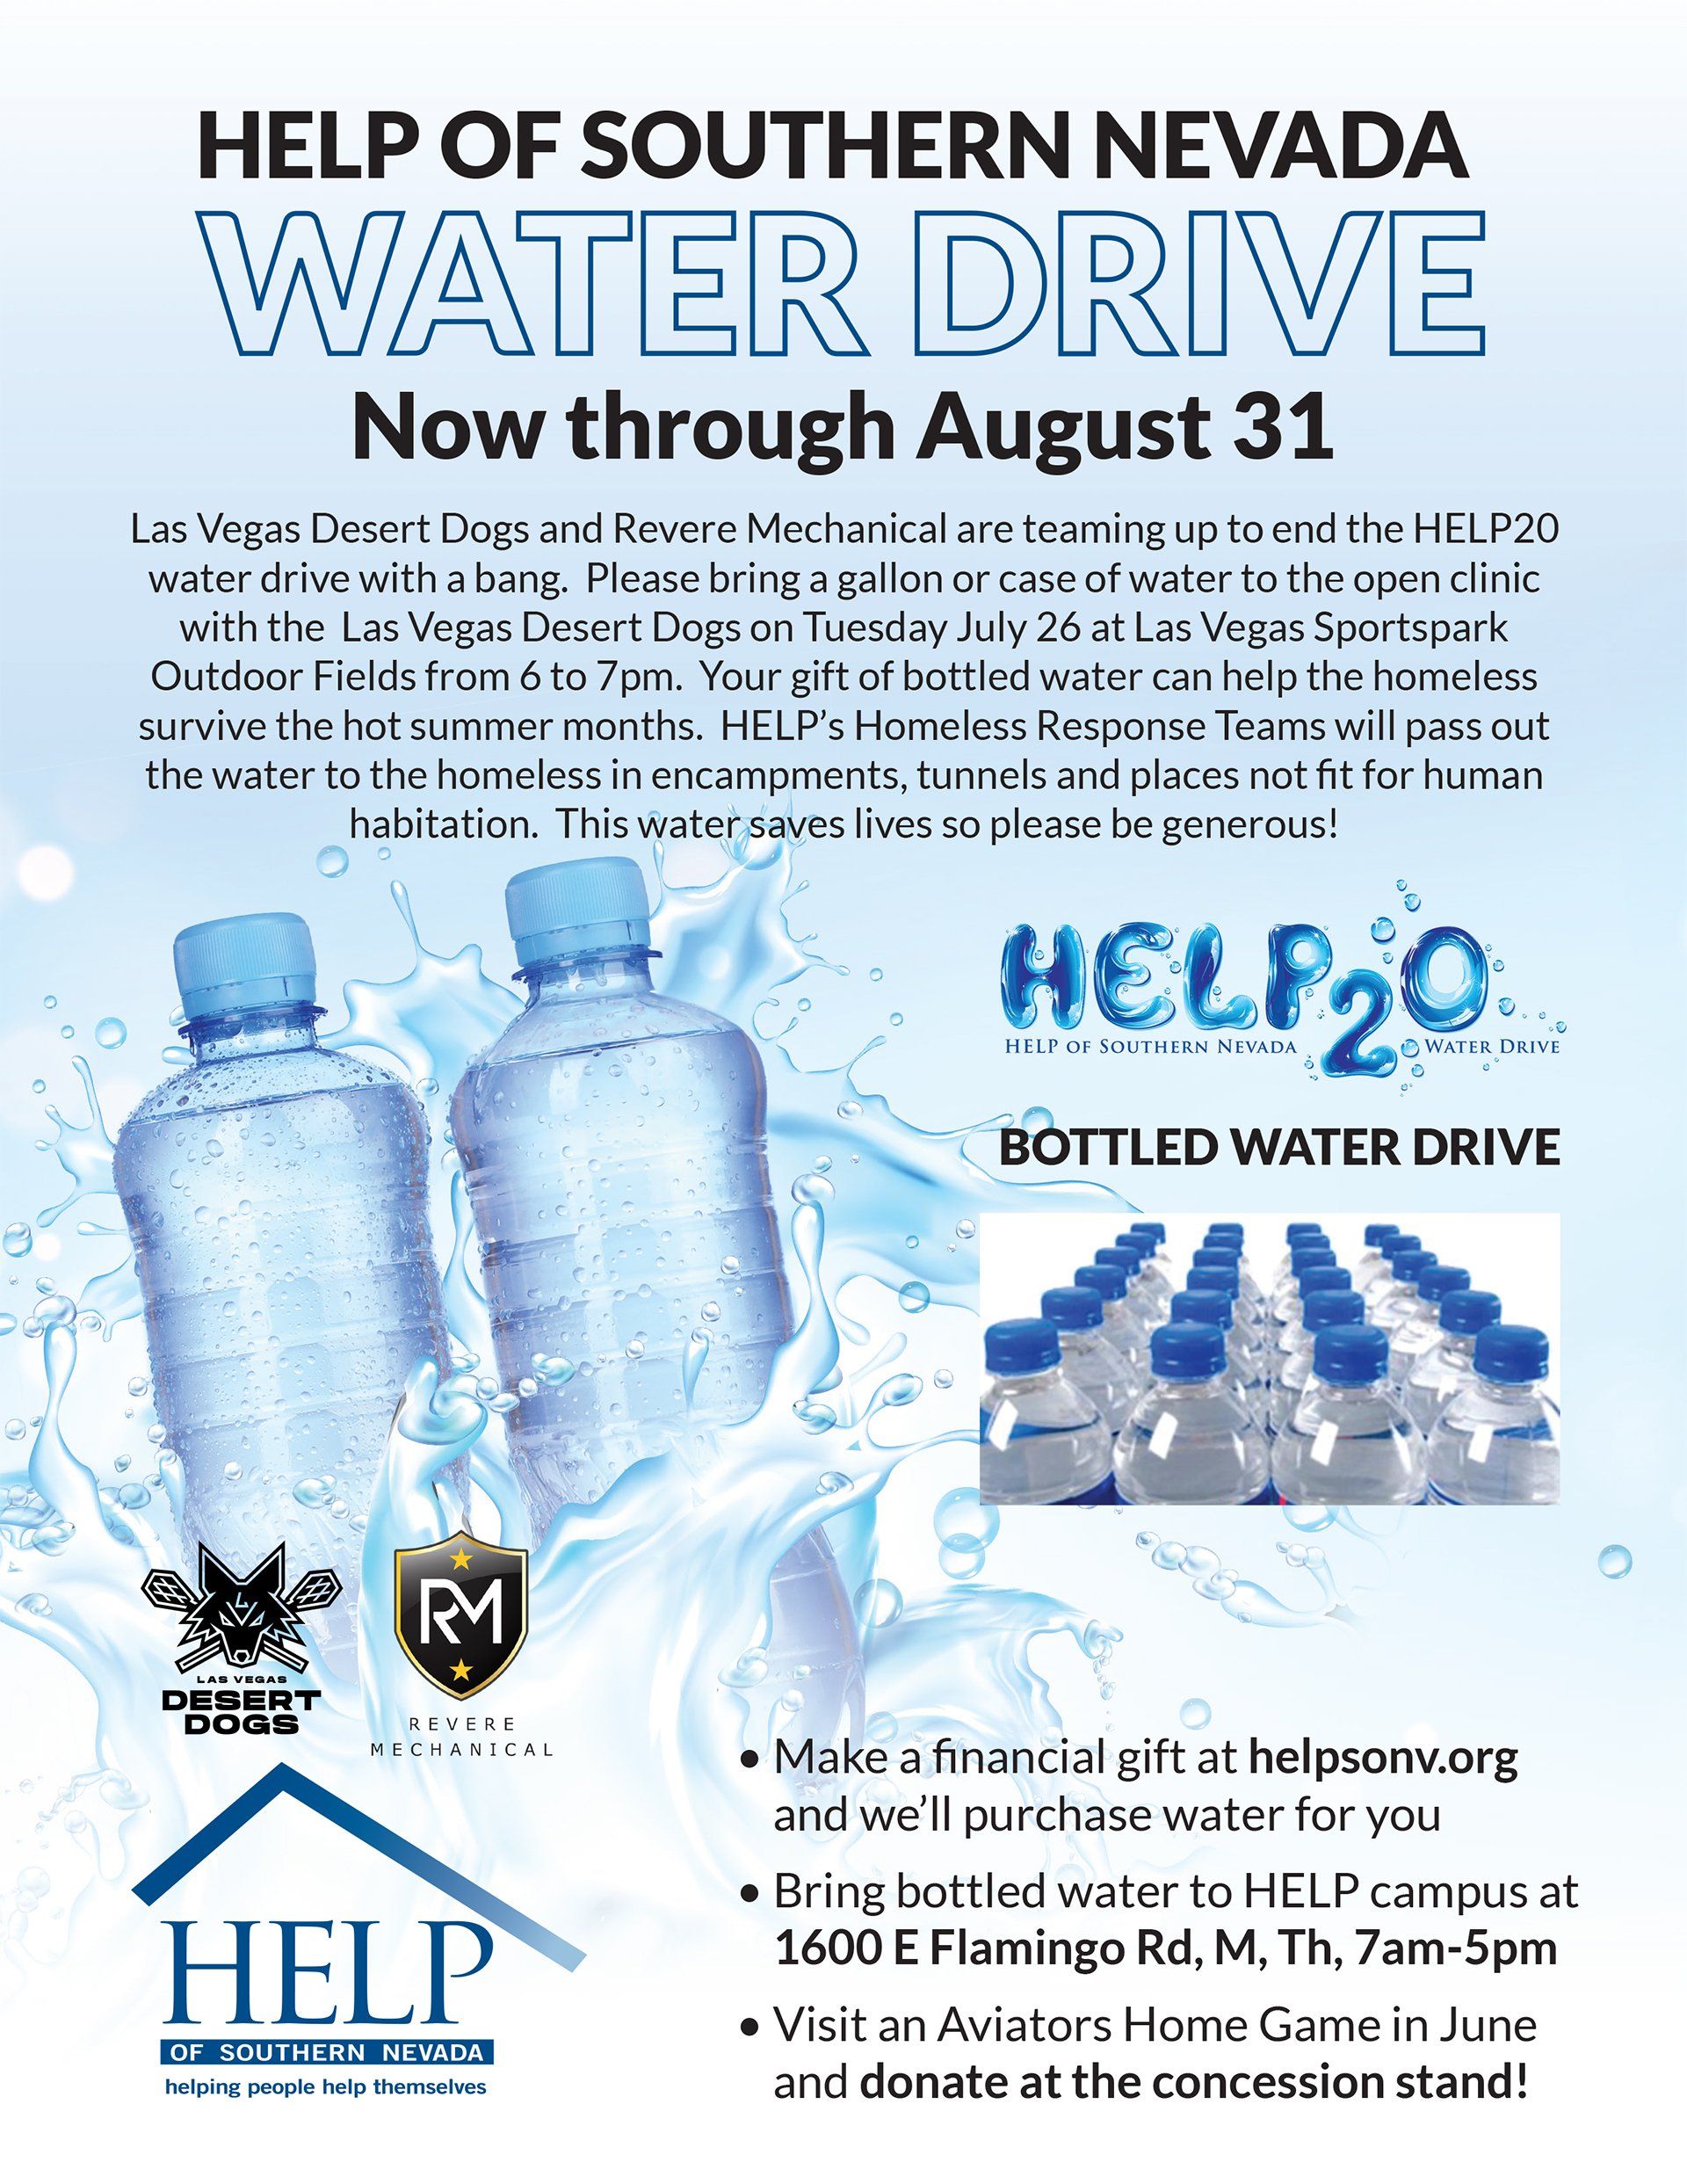 Southern Nevada Water Drive